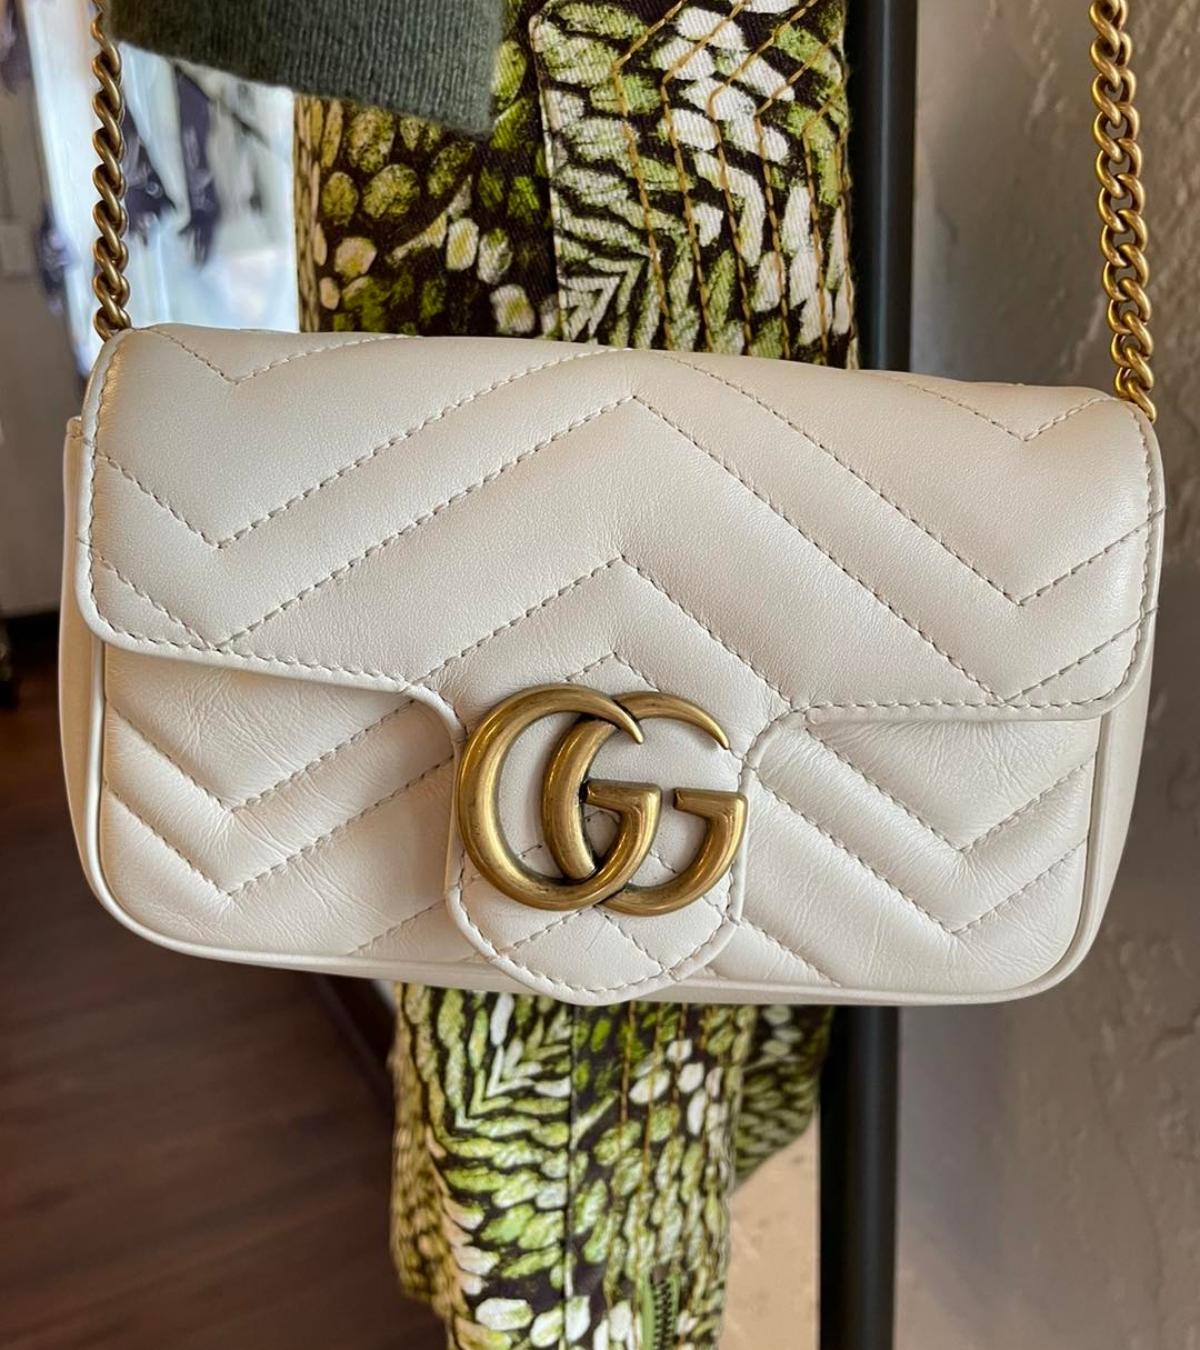 Gucci Marmont Handbags for sale in Tampa, Florida, Facebook Marketplace